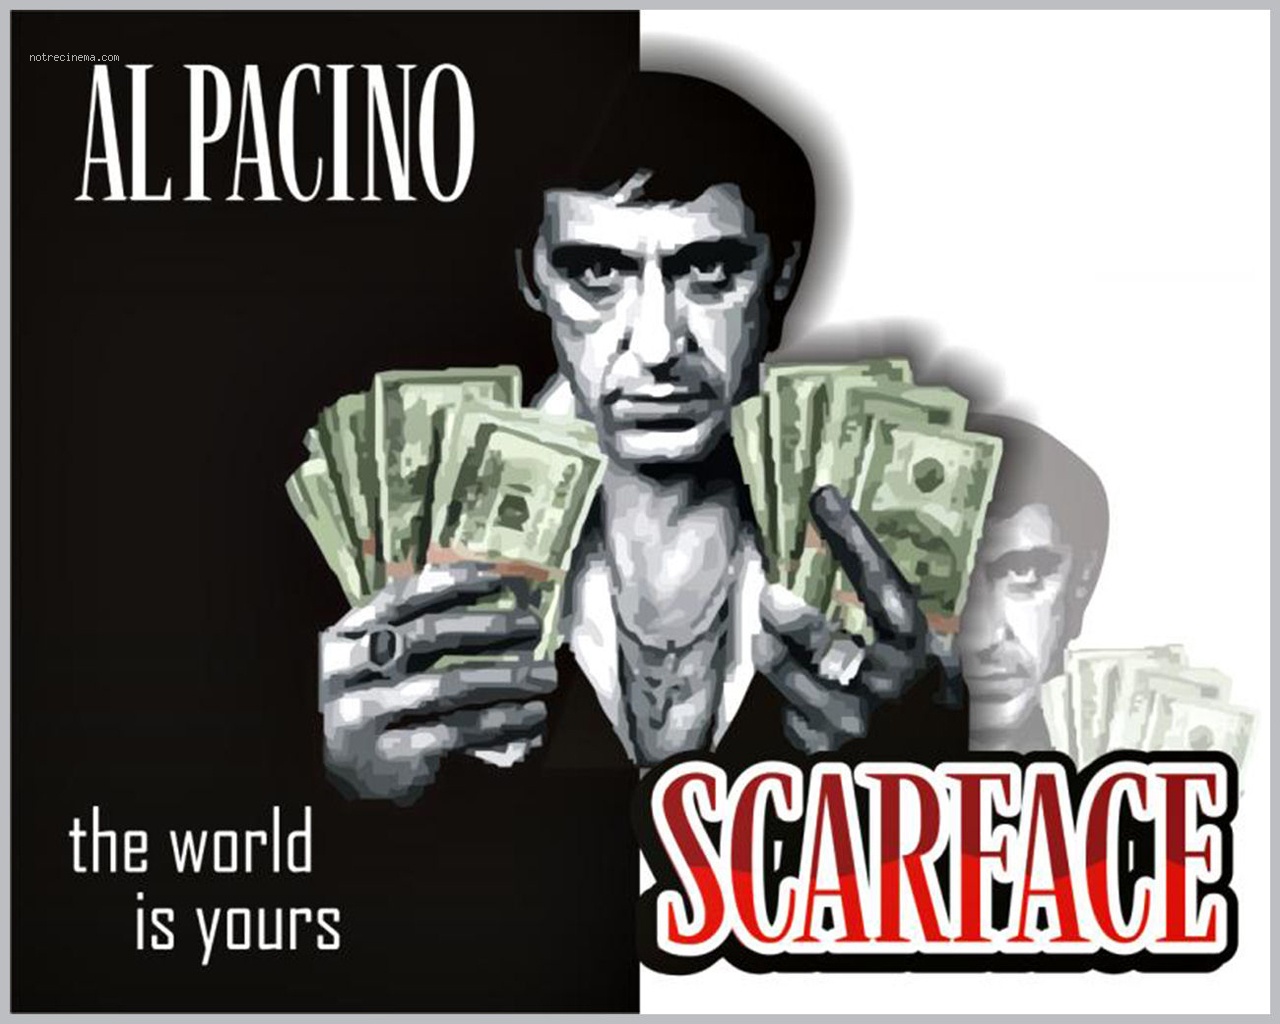 Scarface Wallpaper Pictures ExpoImage